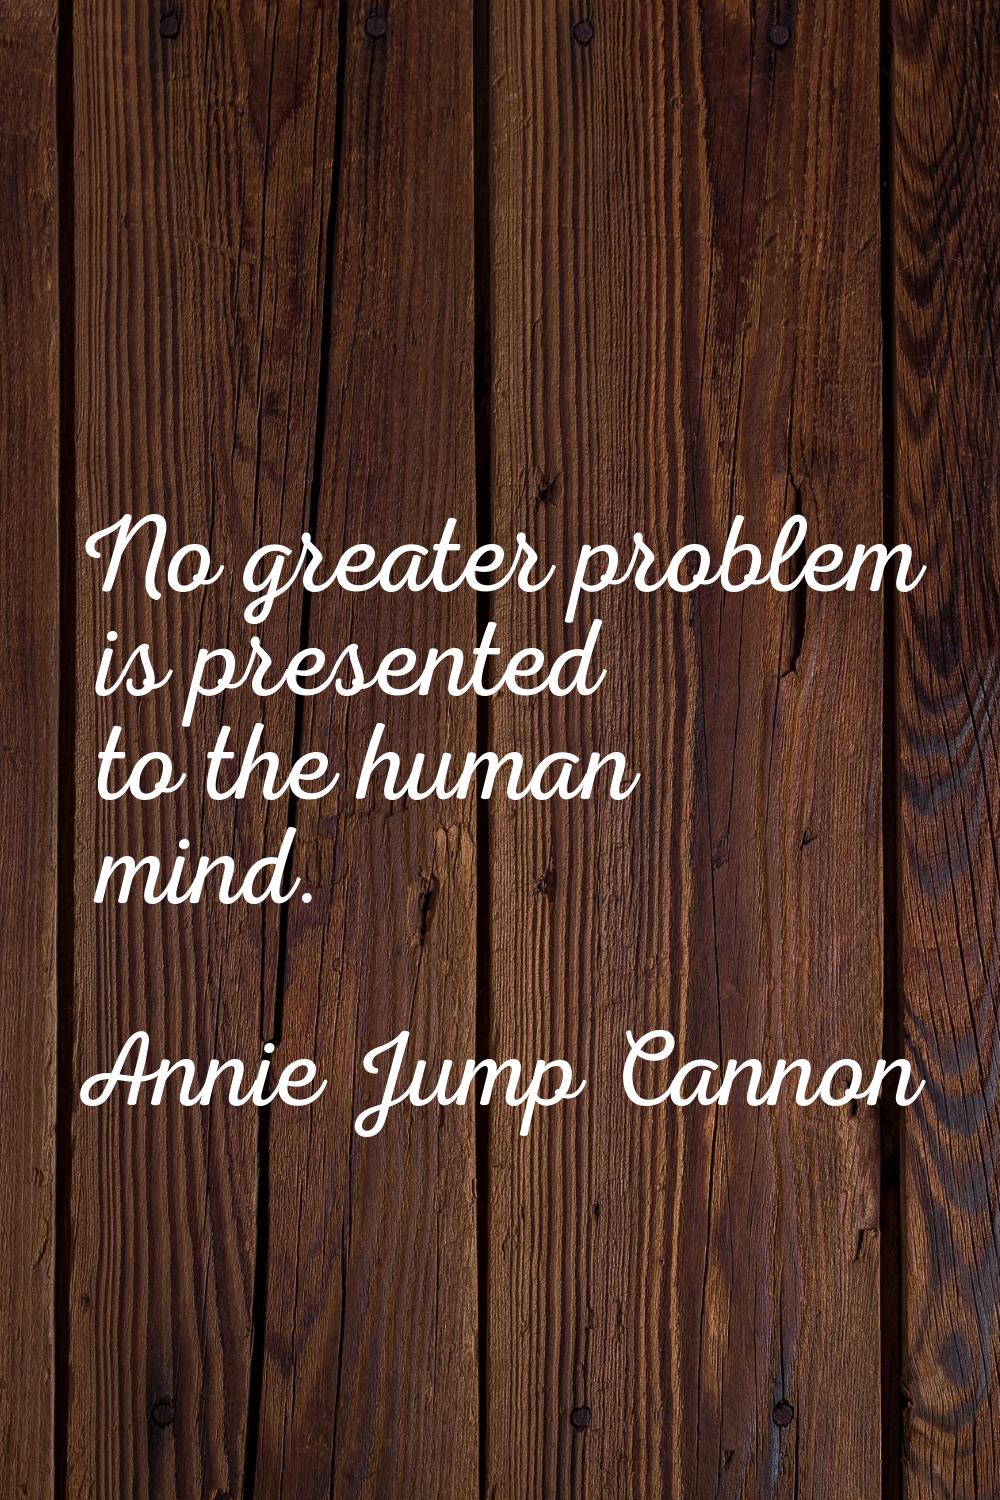 No greater problem is presented to the human mind.